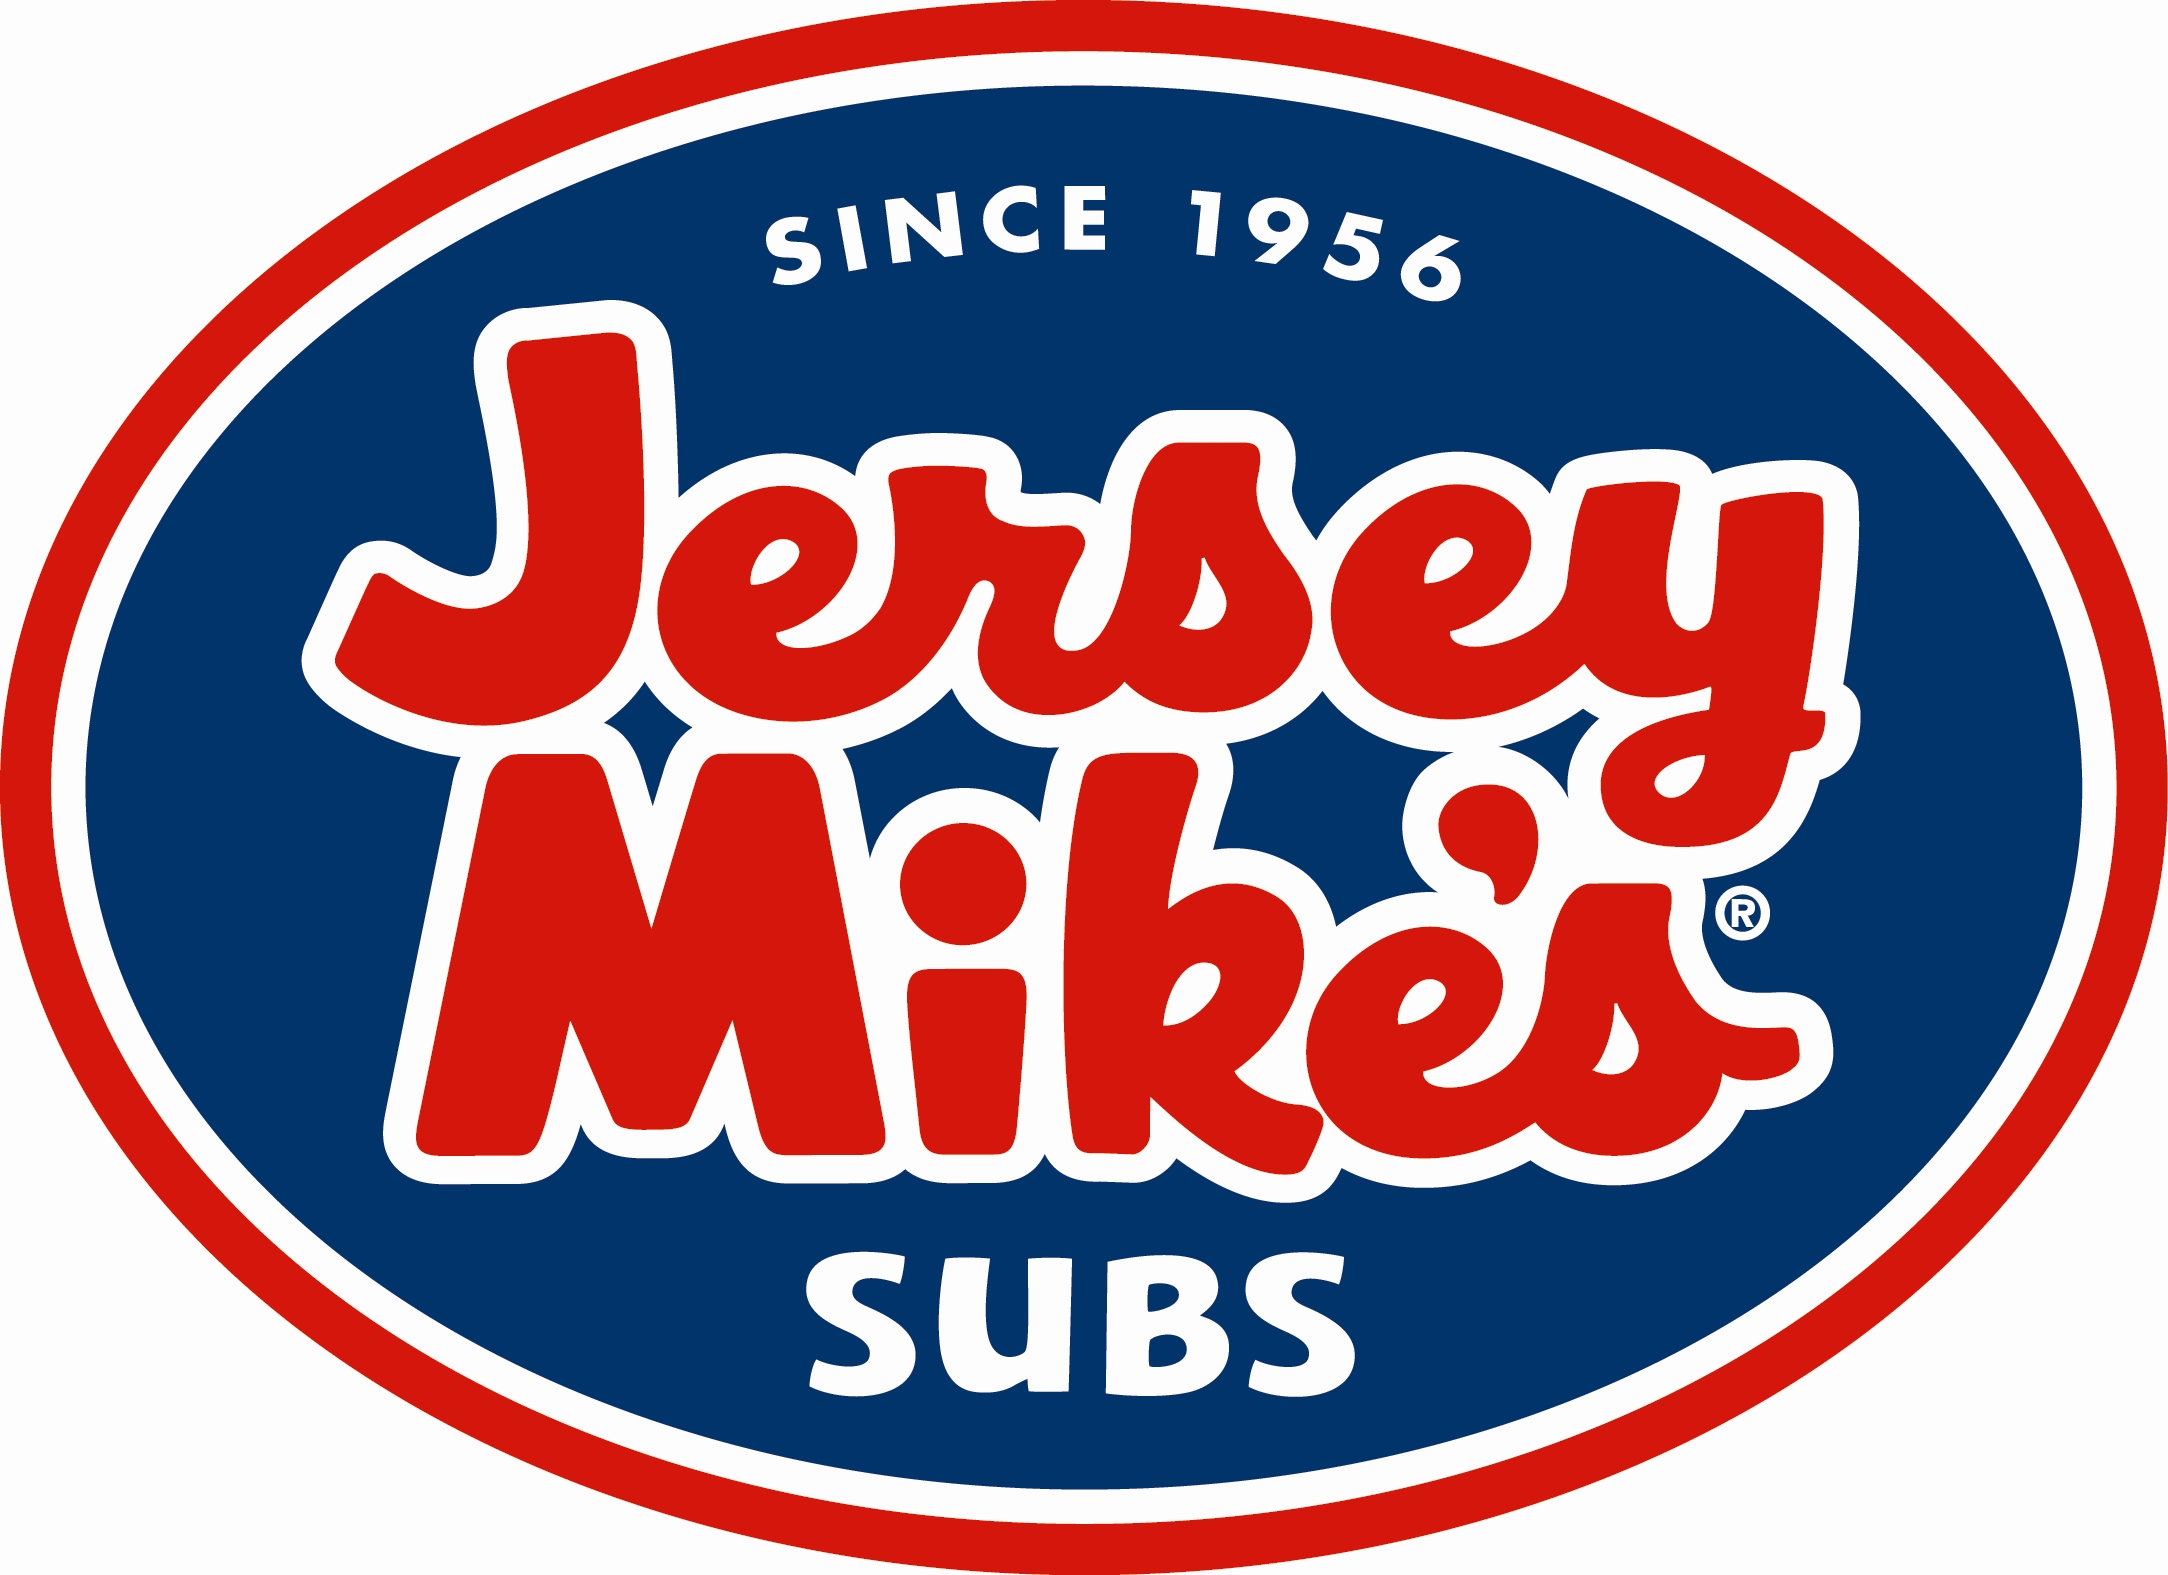 Jersey Mike's Subs Franchise